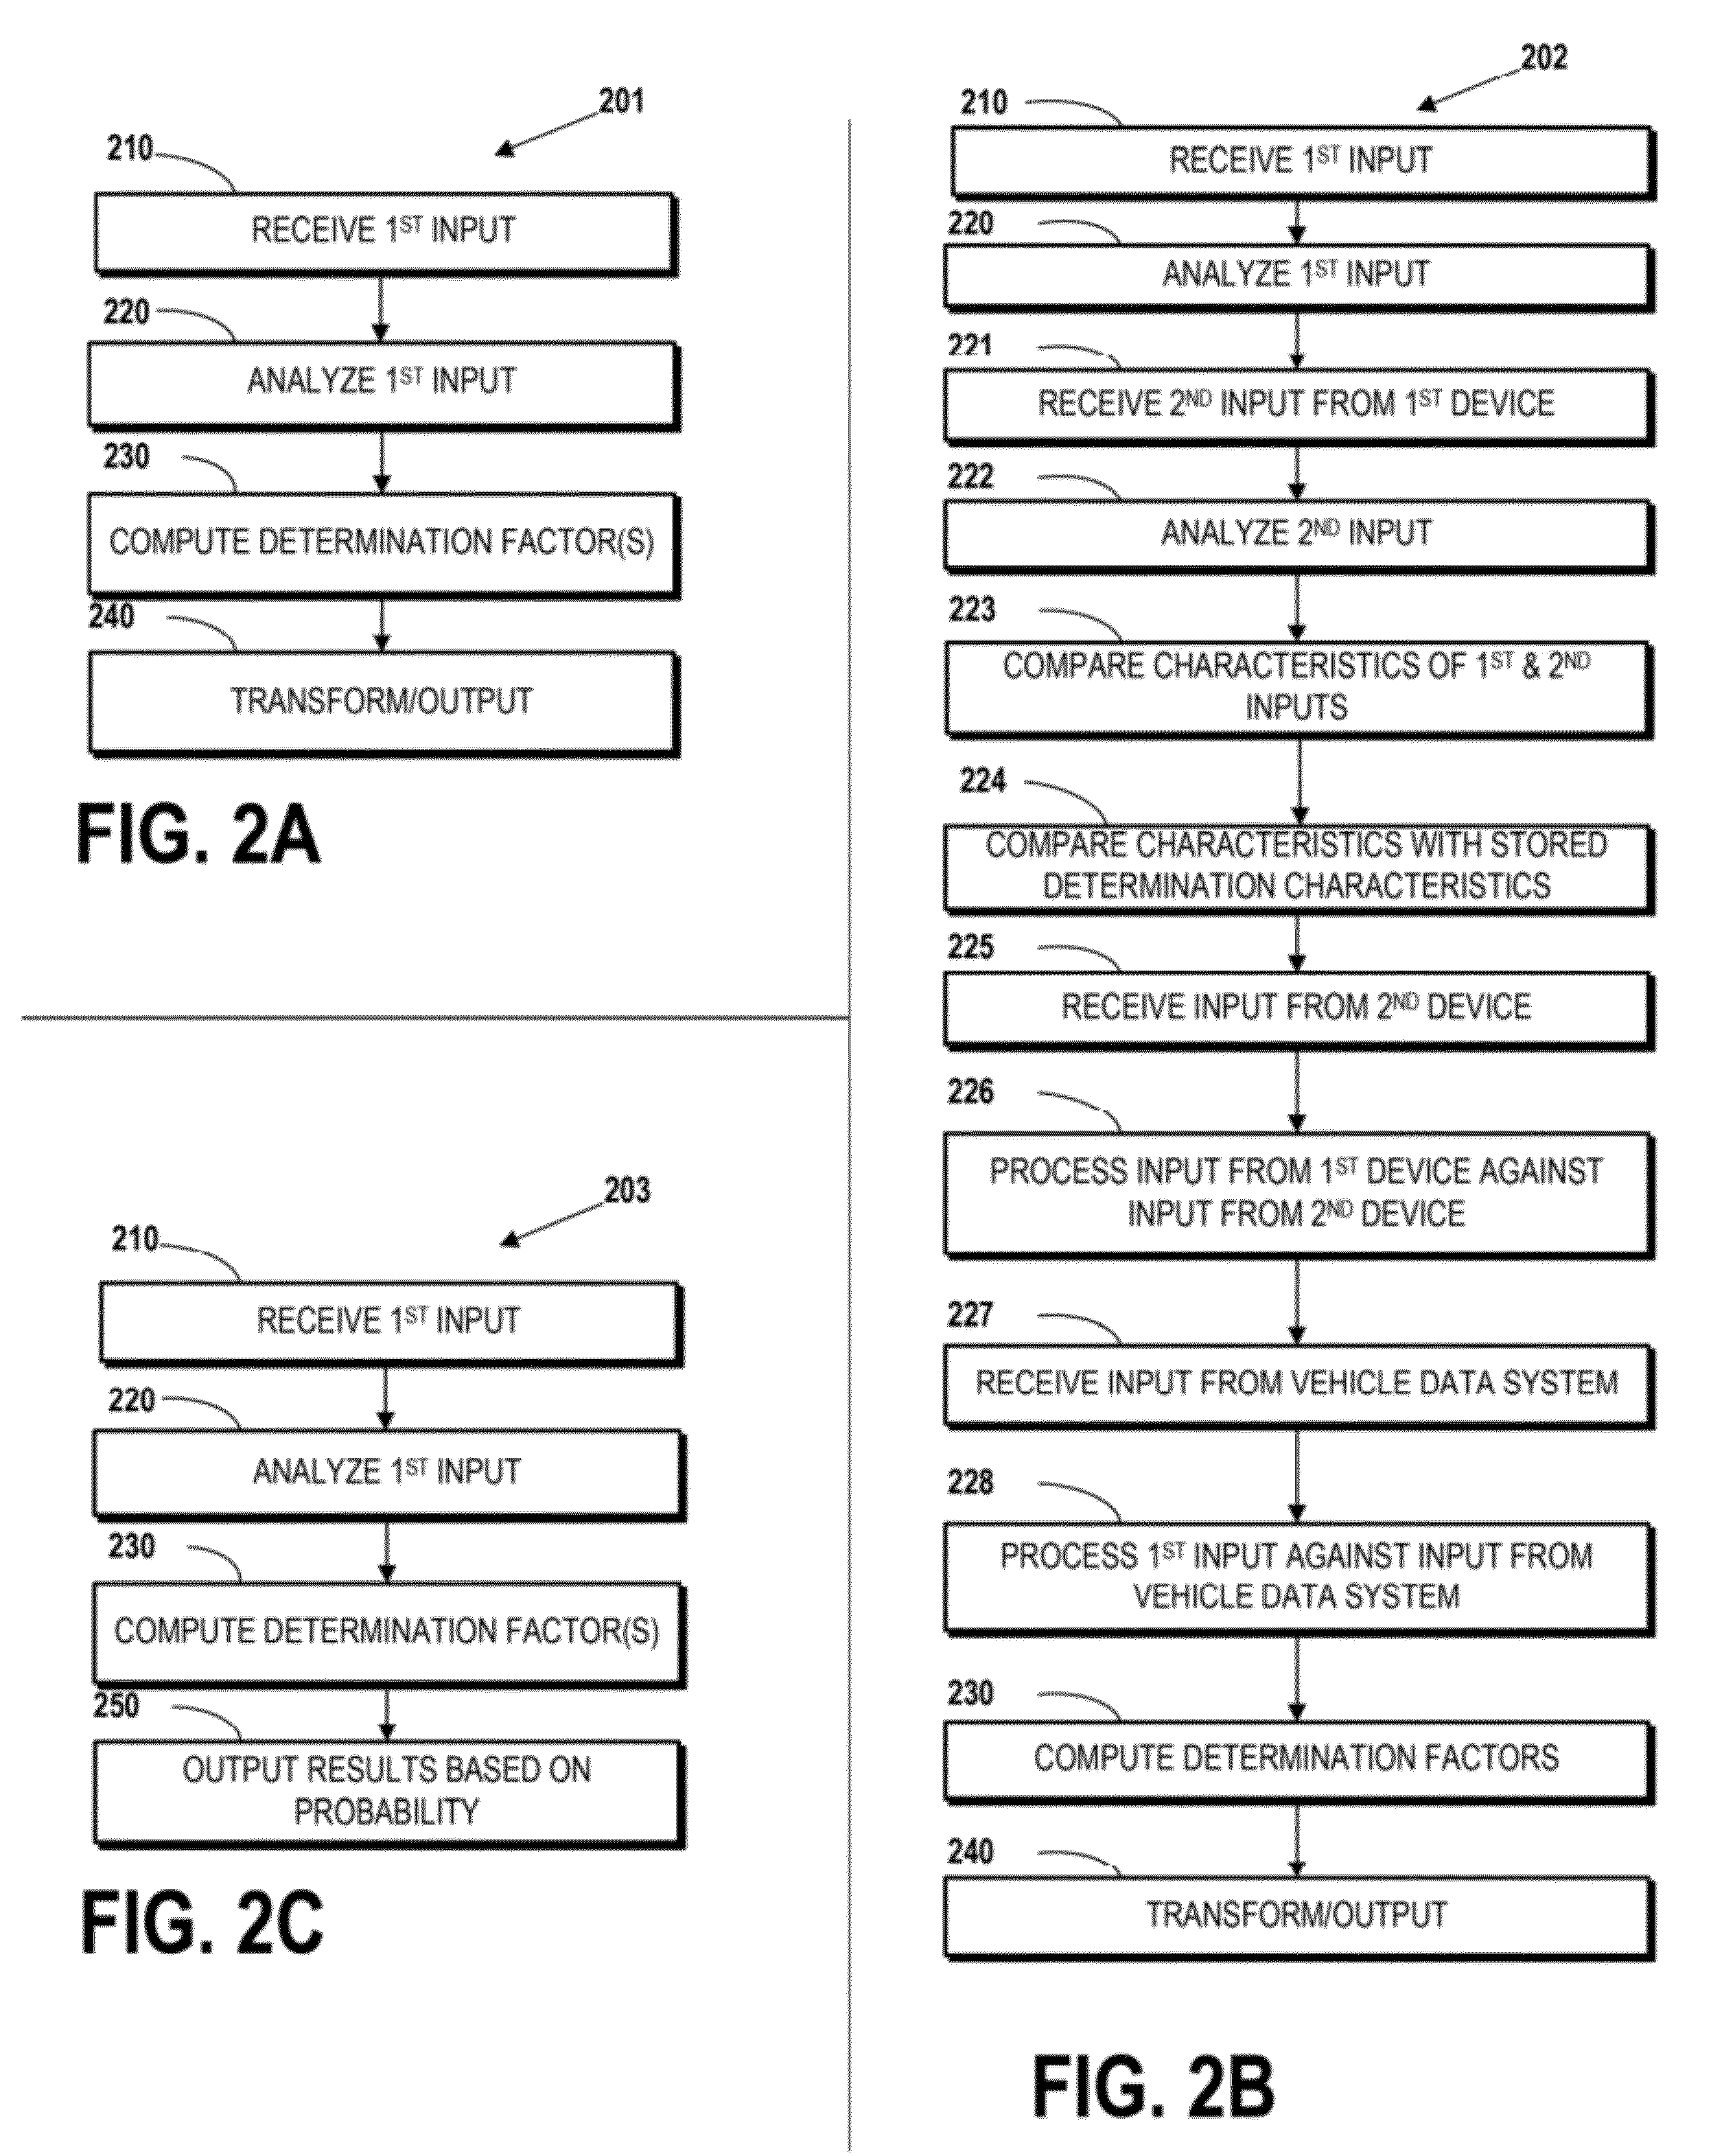 System and method for selectively restricting in-vehicle mobile device usage